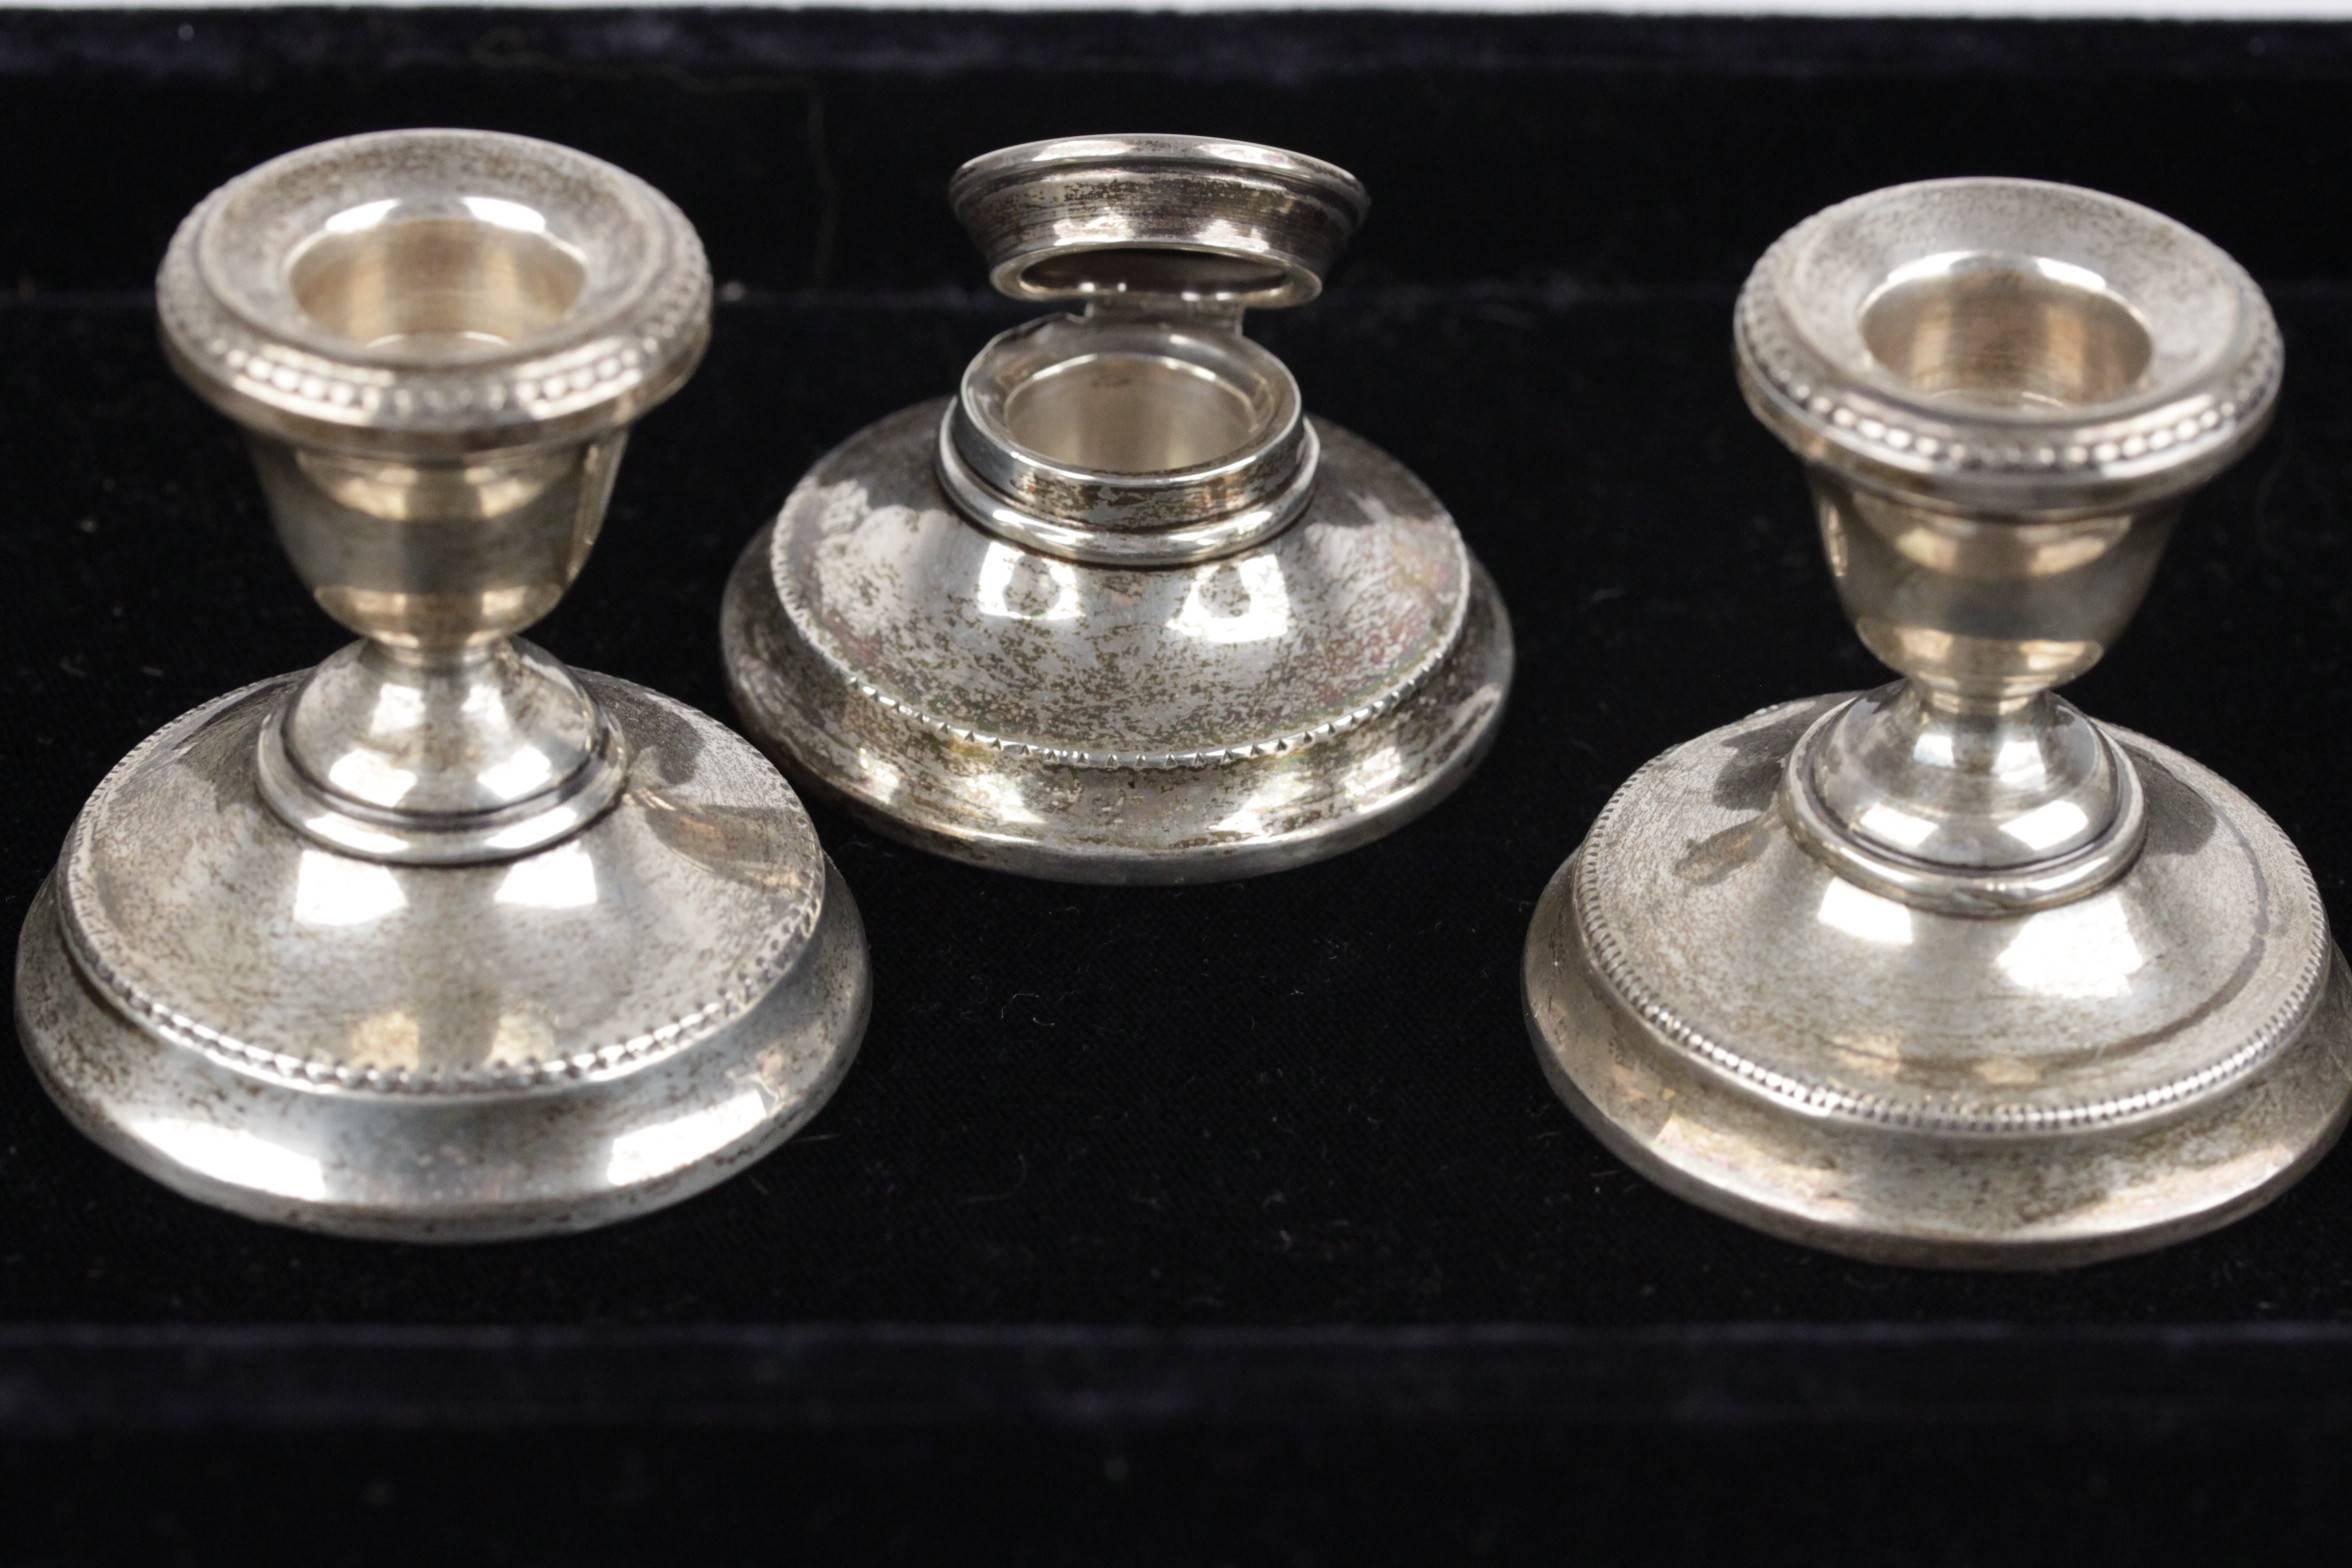  - English antique silver desk set that includes 2 candlestick holder & 1 inkwell
- Circa 1928
- Hallmarks engraved on each piece
- Covered round base
- Base diameter (inkwell): 2 1/4 inches - 6 cm
- Base diameter (candle holders): 2 1/4 inches - 6